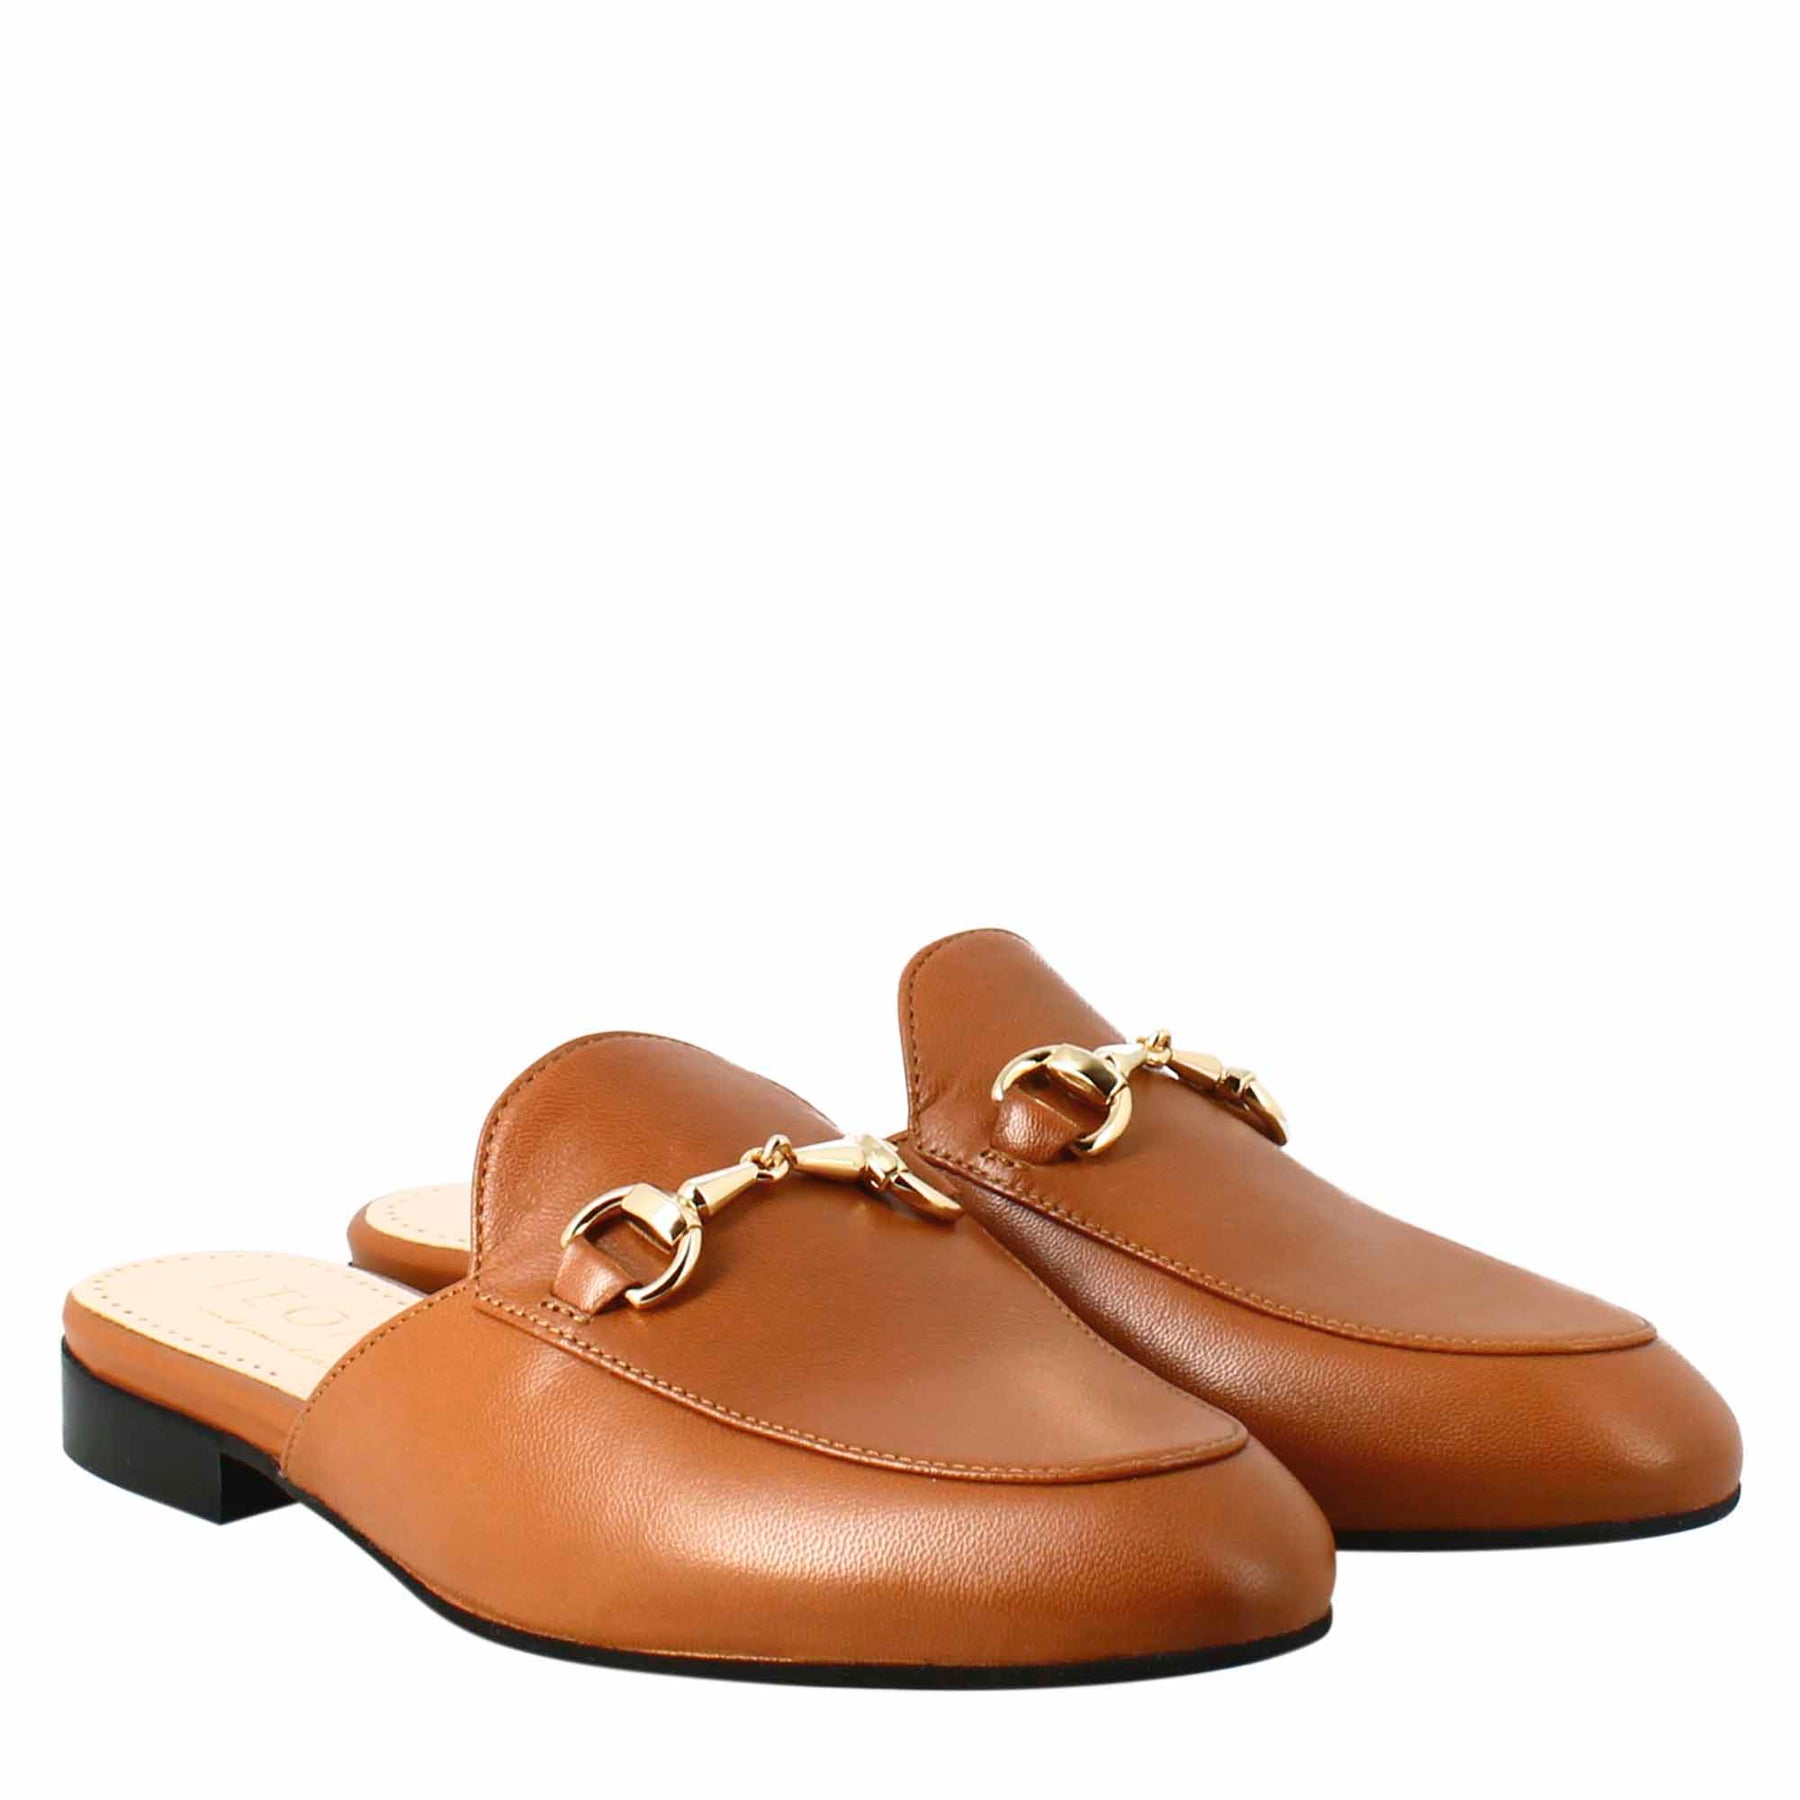 Brown sabot with golden buckle and leather sole